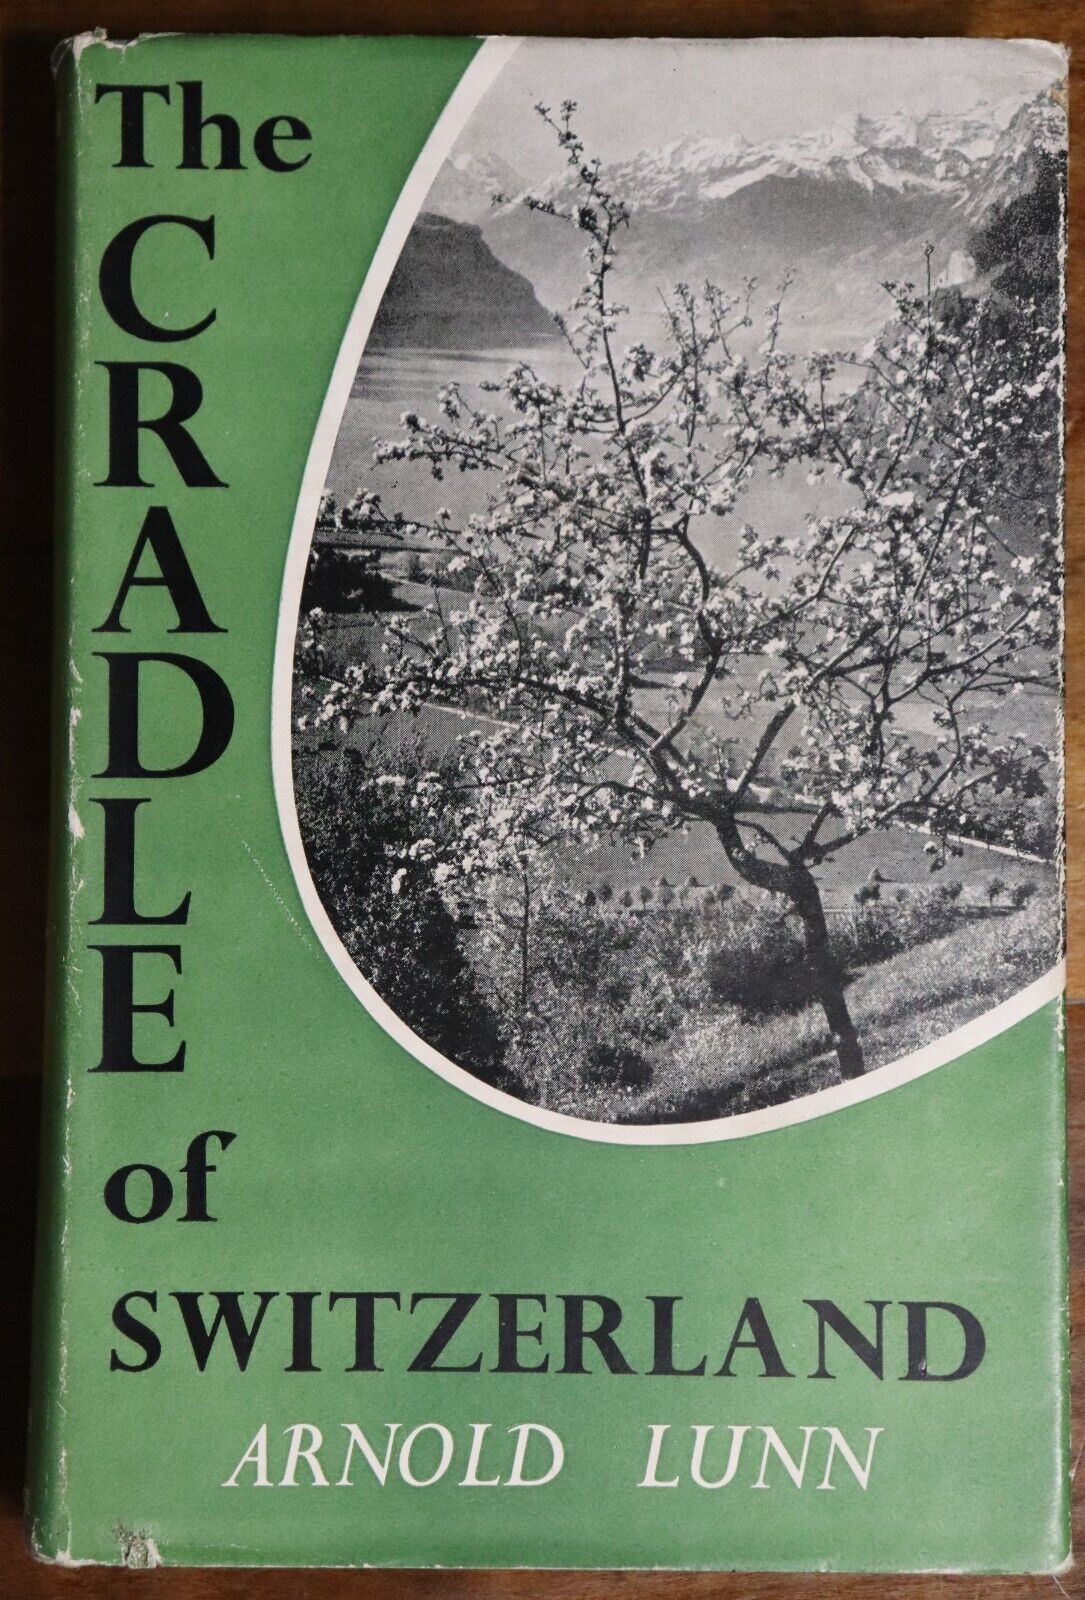 The Cradle Of Switzerland - 1952 - 1st Edition Vintage Travel Book